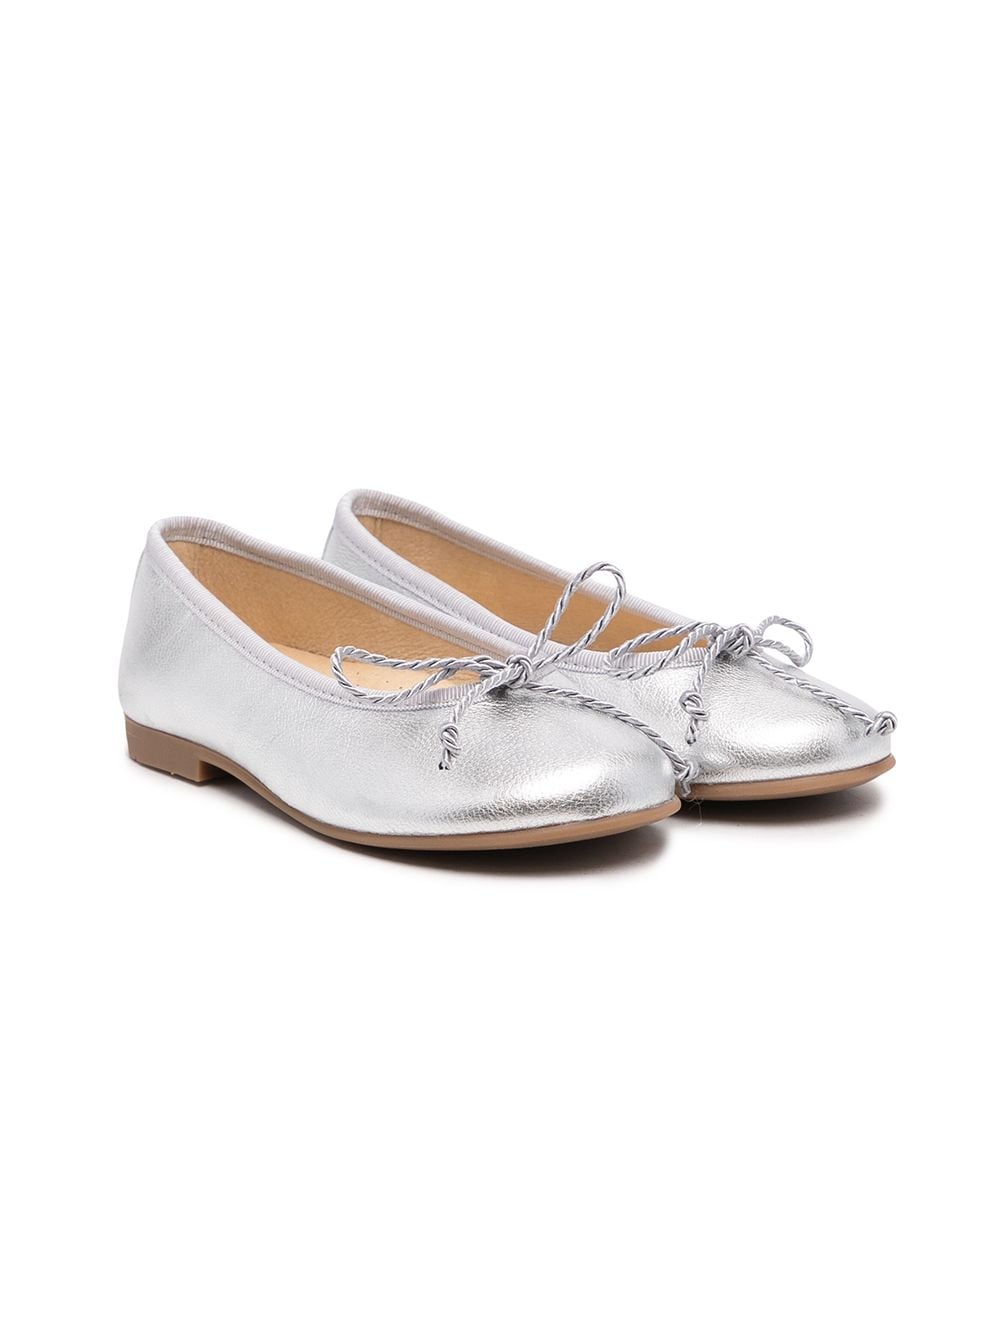 ANDANINES classic ballerina shoes - Silver von ANDANINES